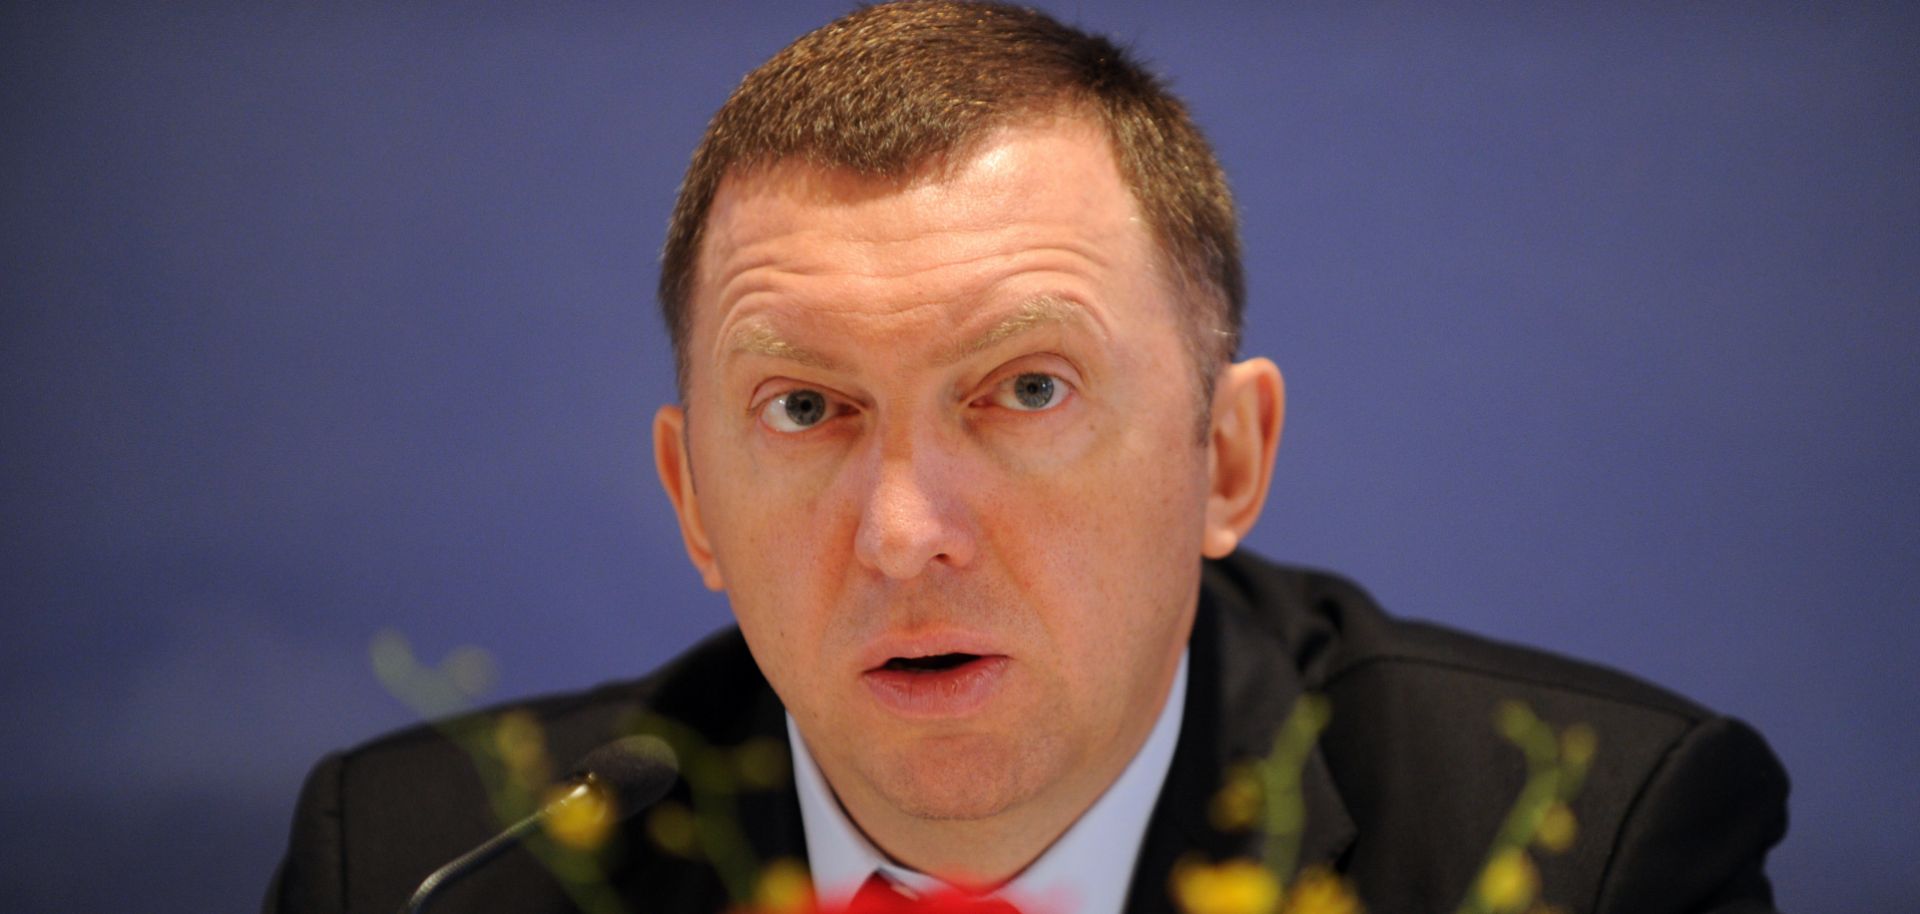 Oleg Deripaska, CEO of Russian metals giant RUSAL, speaks during a press conference in Hong Kong on April 12, 2009. 